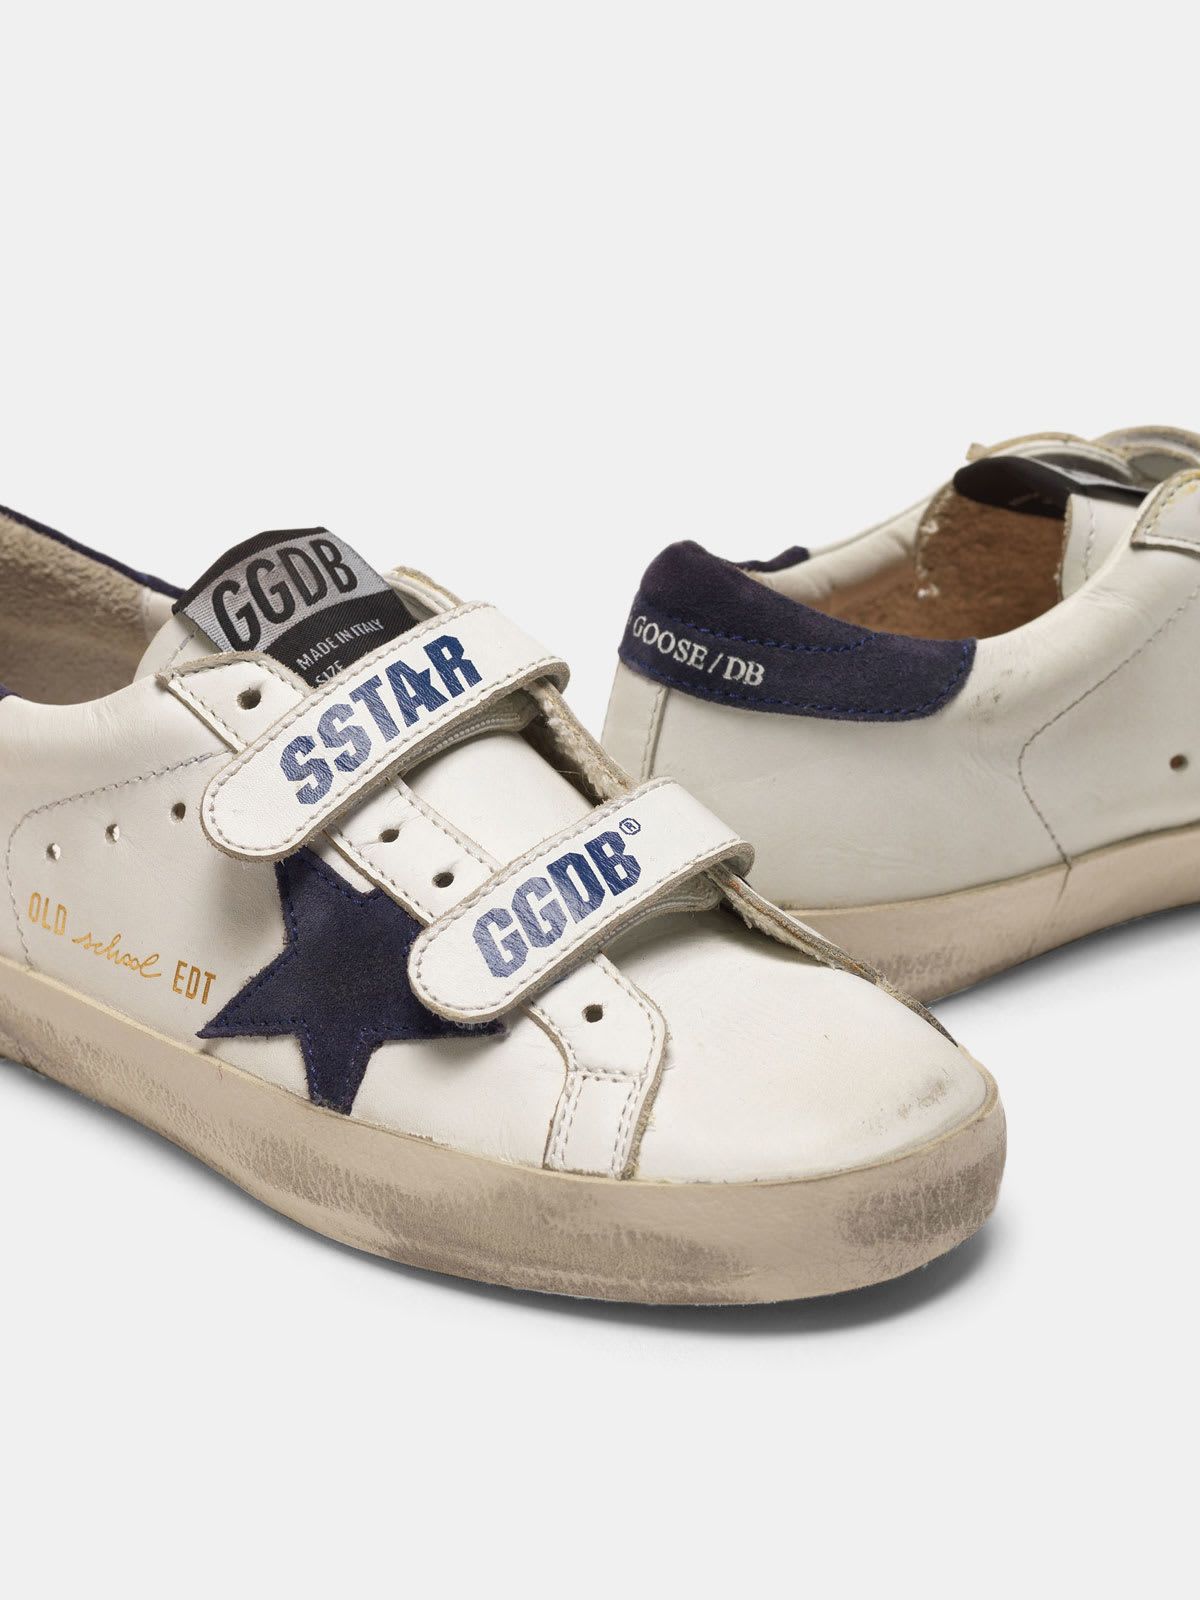 Old School sneakers in leather with suede star and heel tab